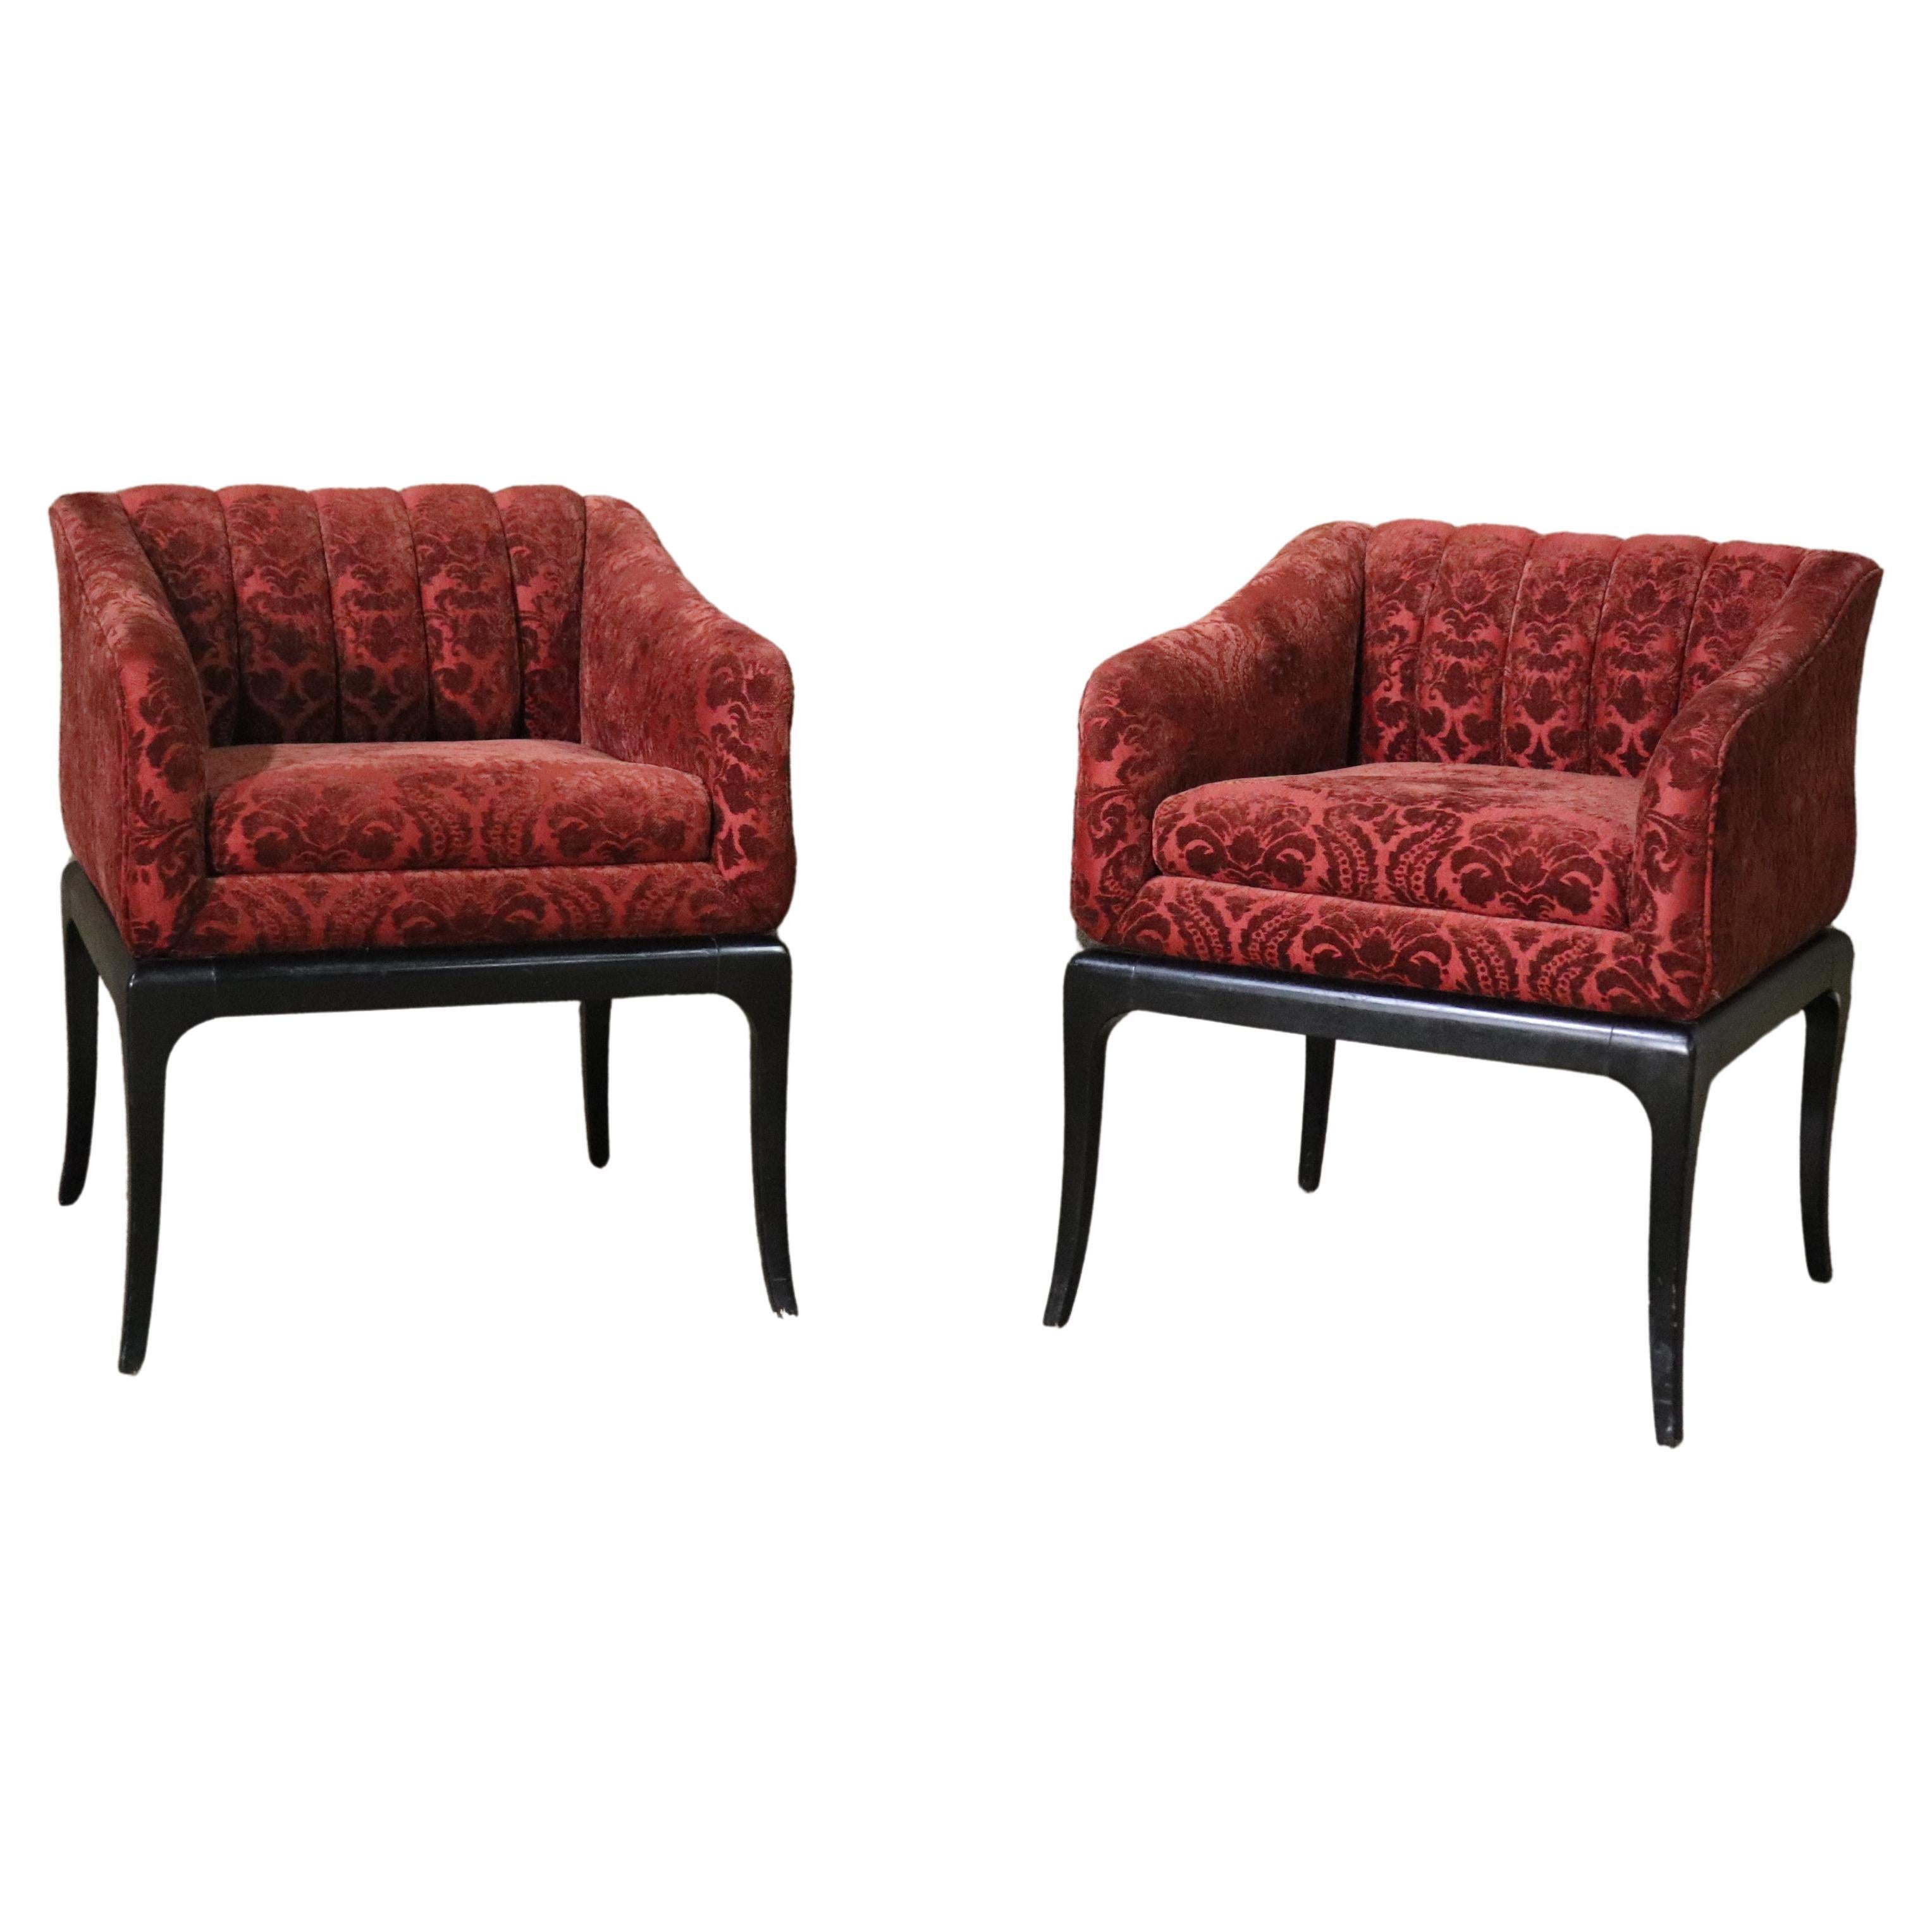 Deco Style Maroon Chairs For Sale